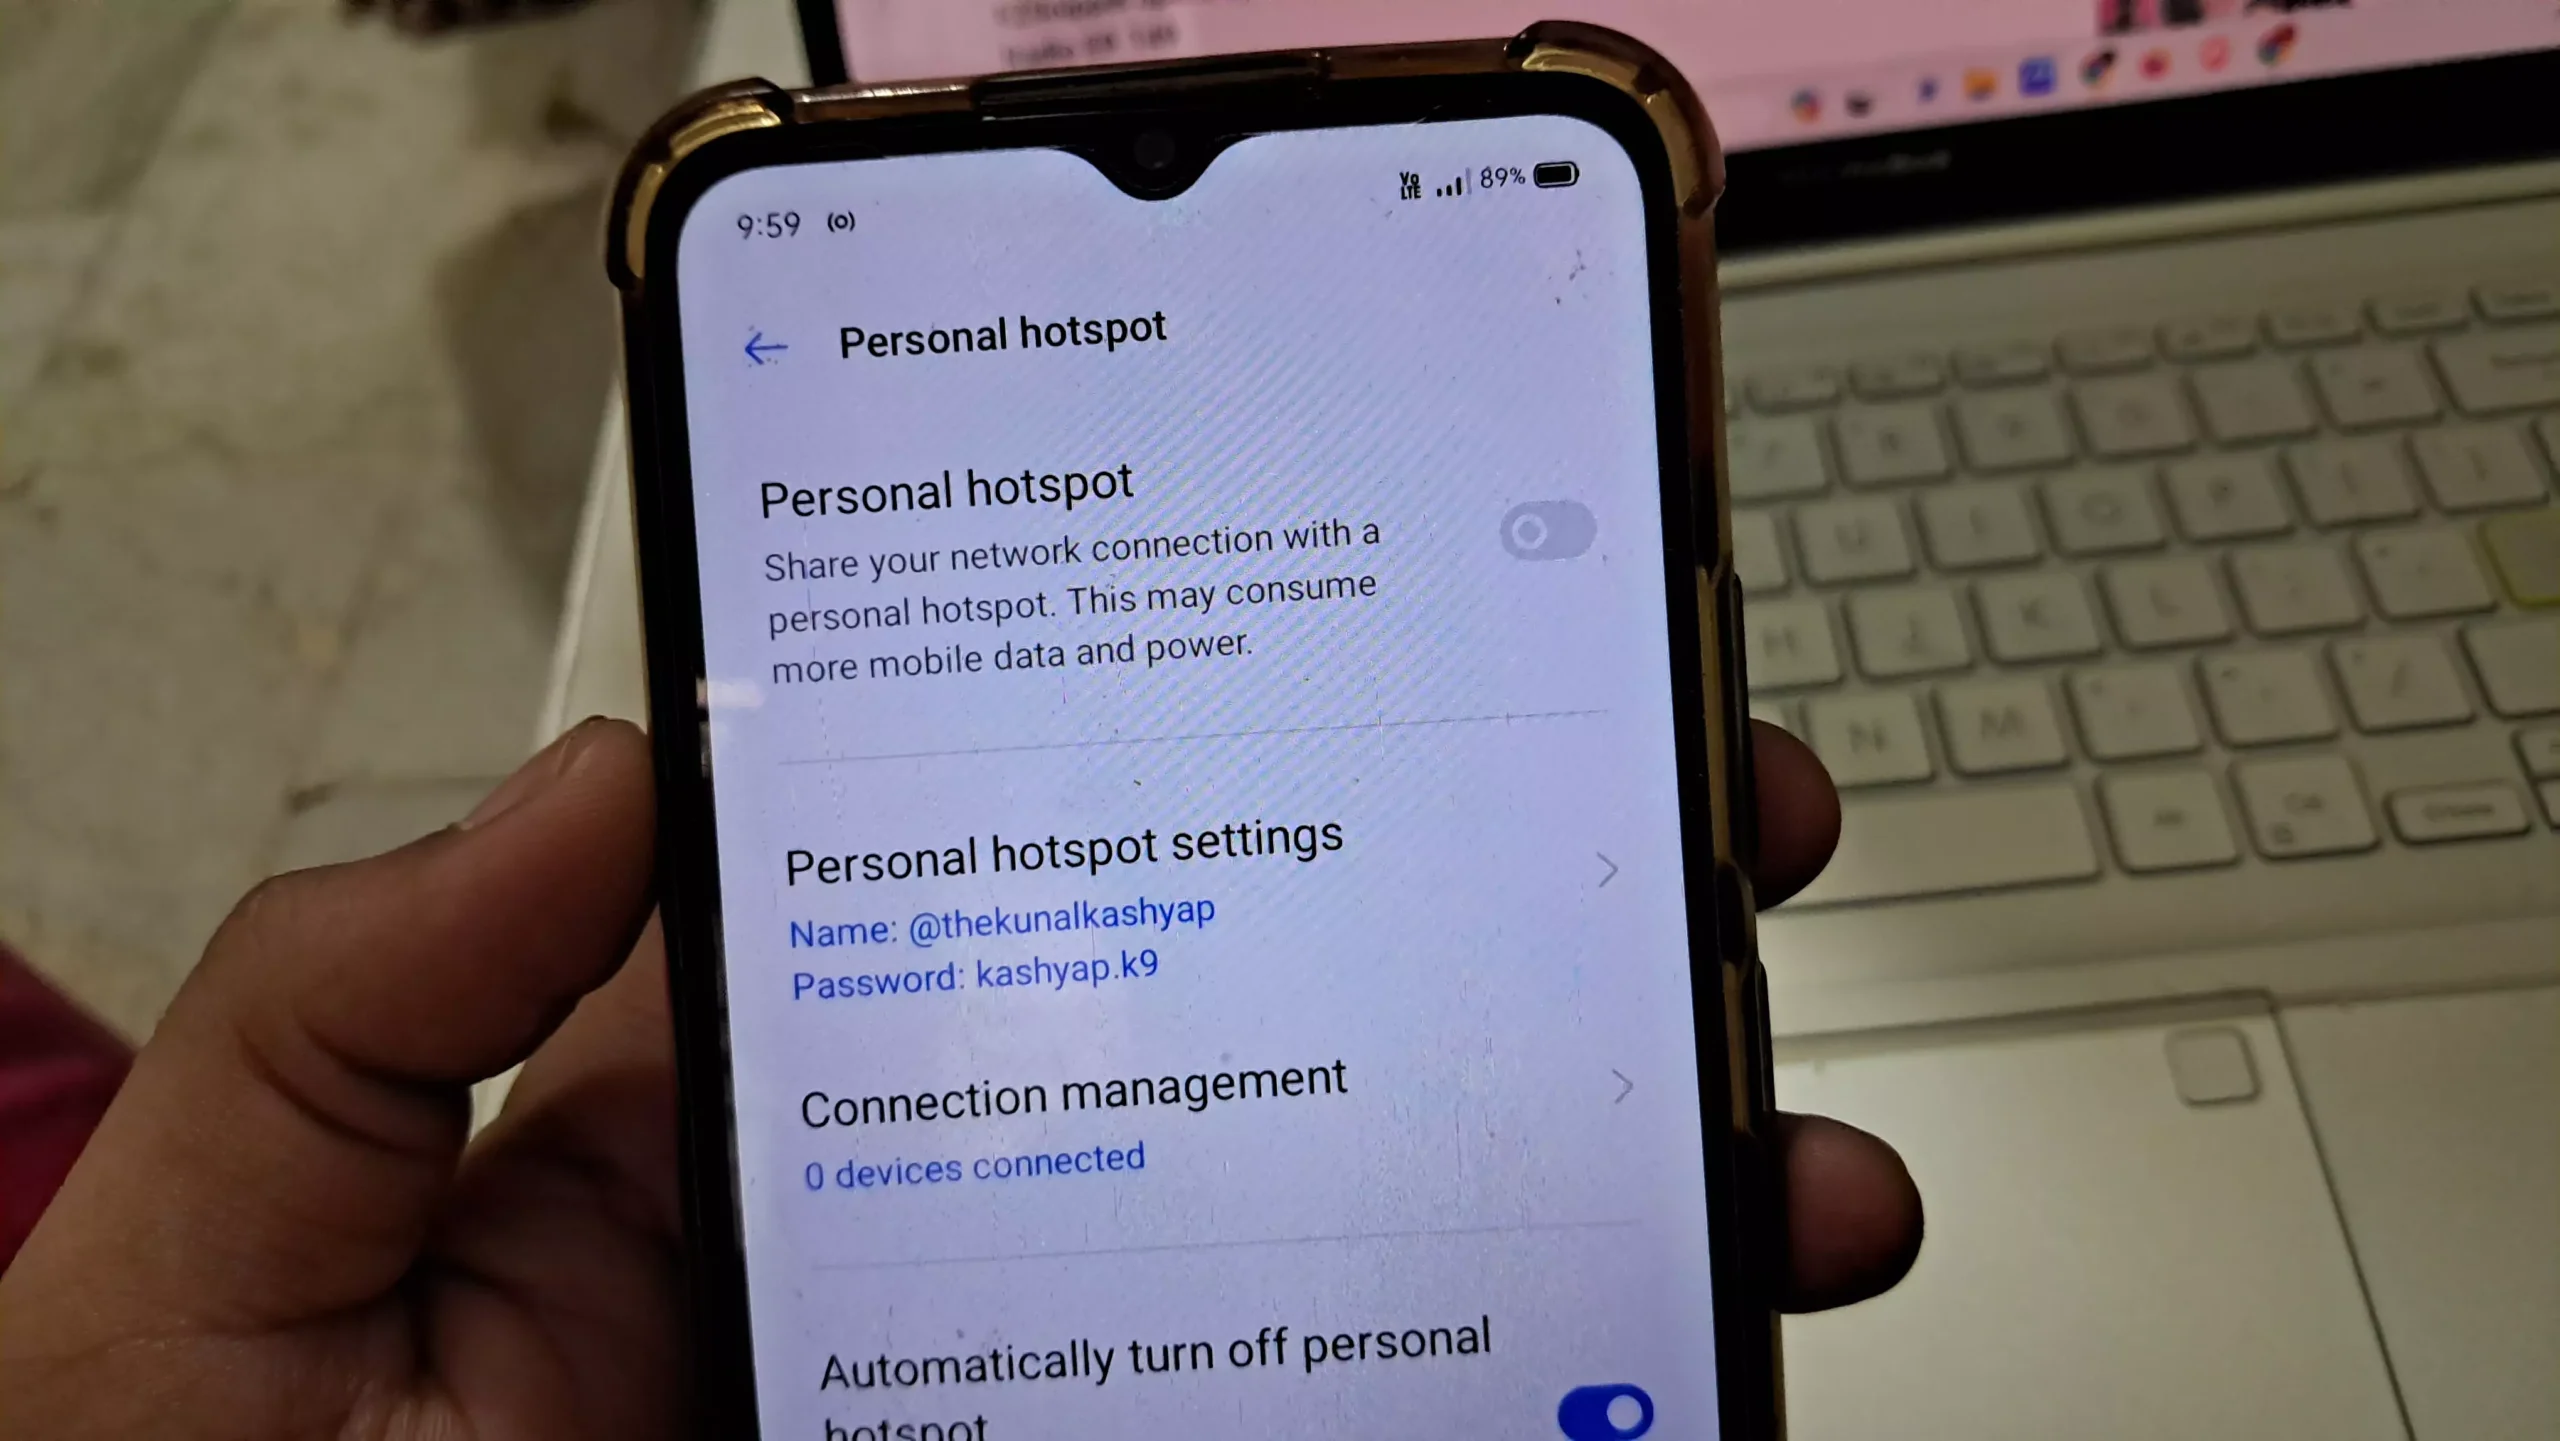 screenshot of personal hotspot image with wifi id and password